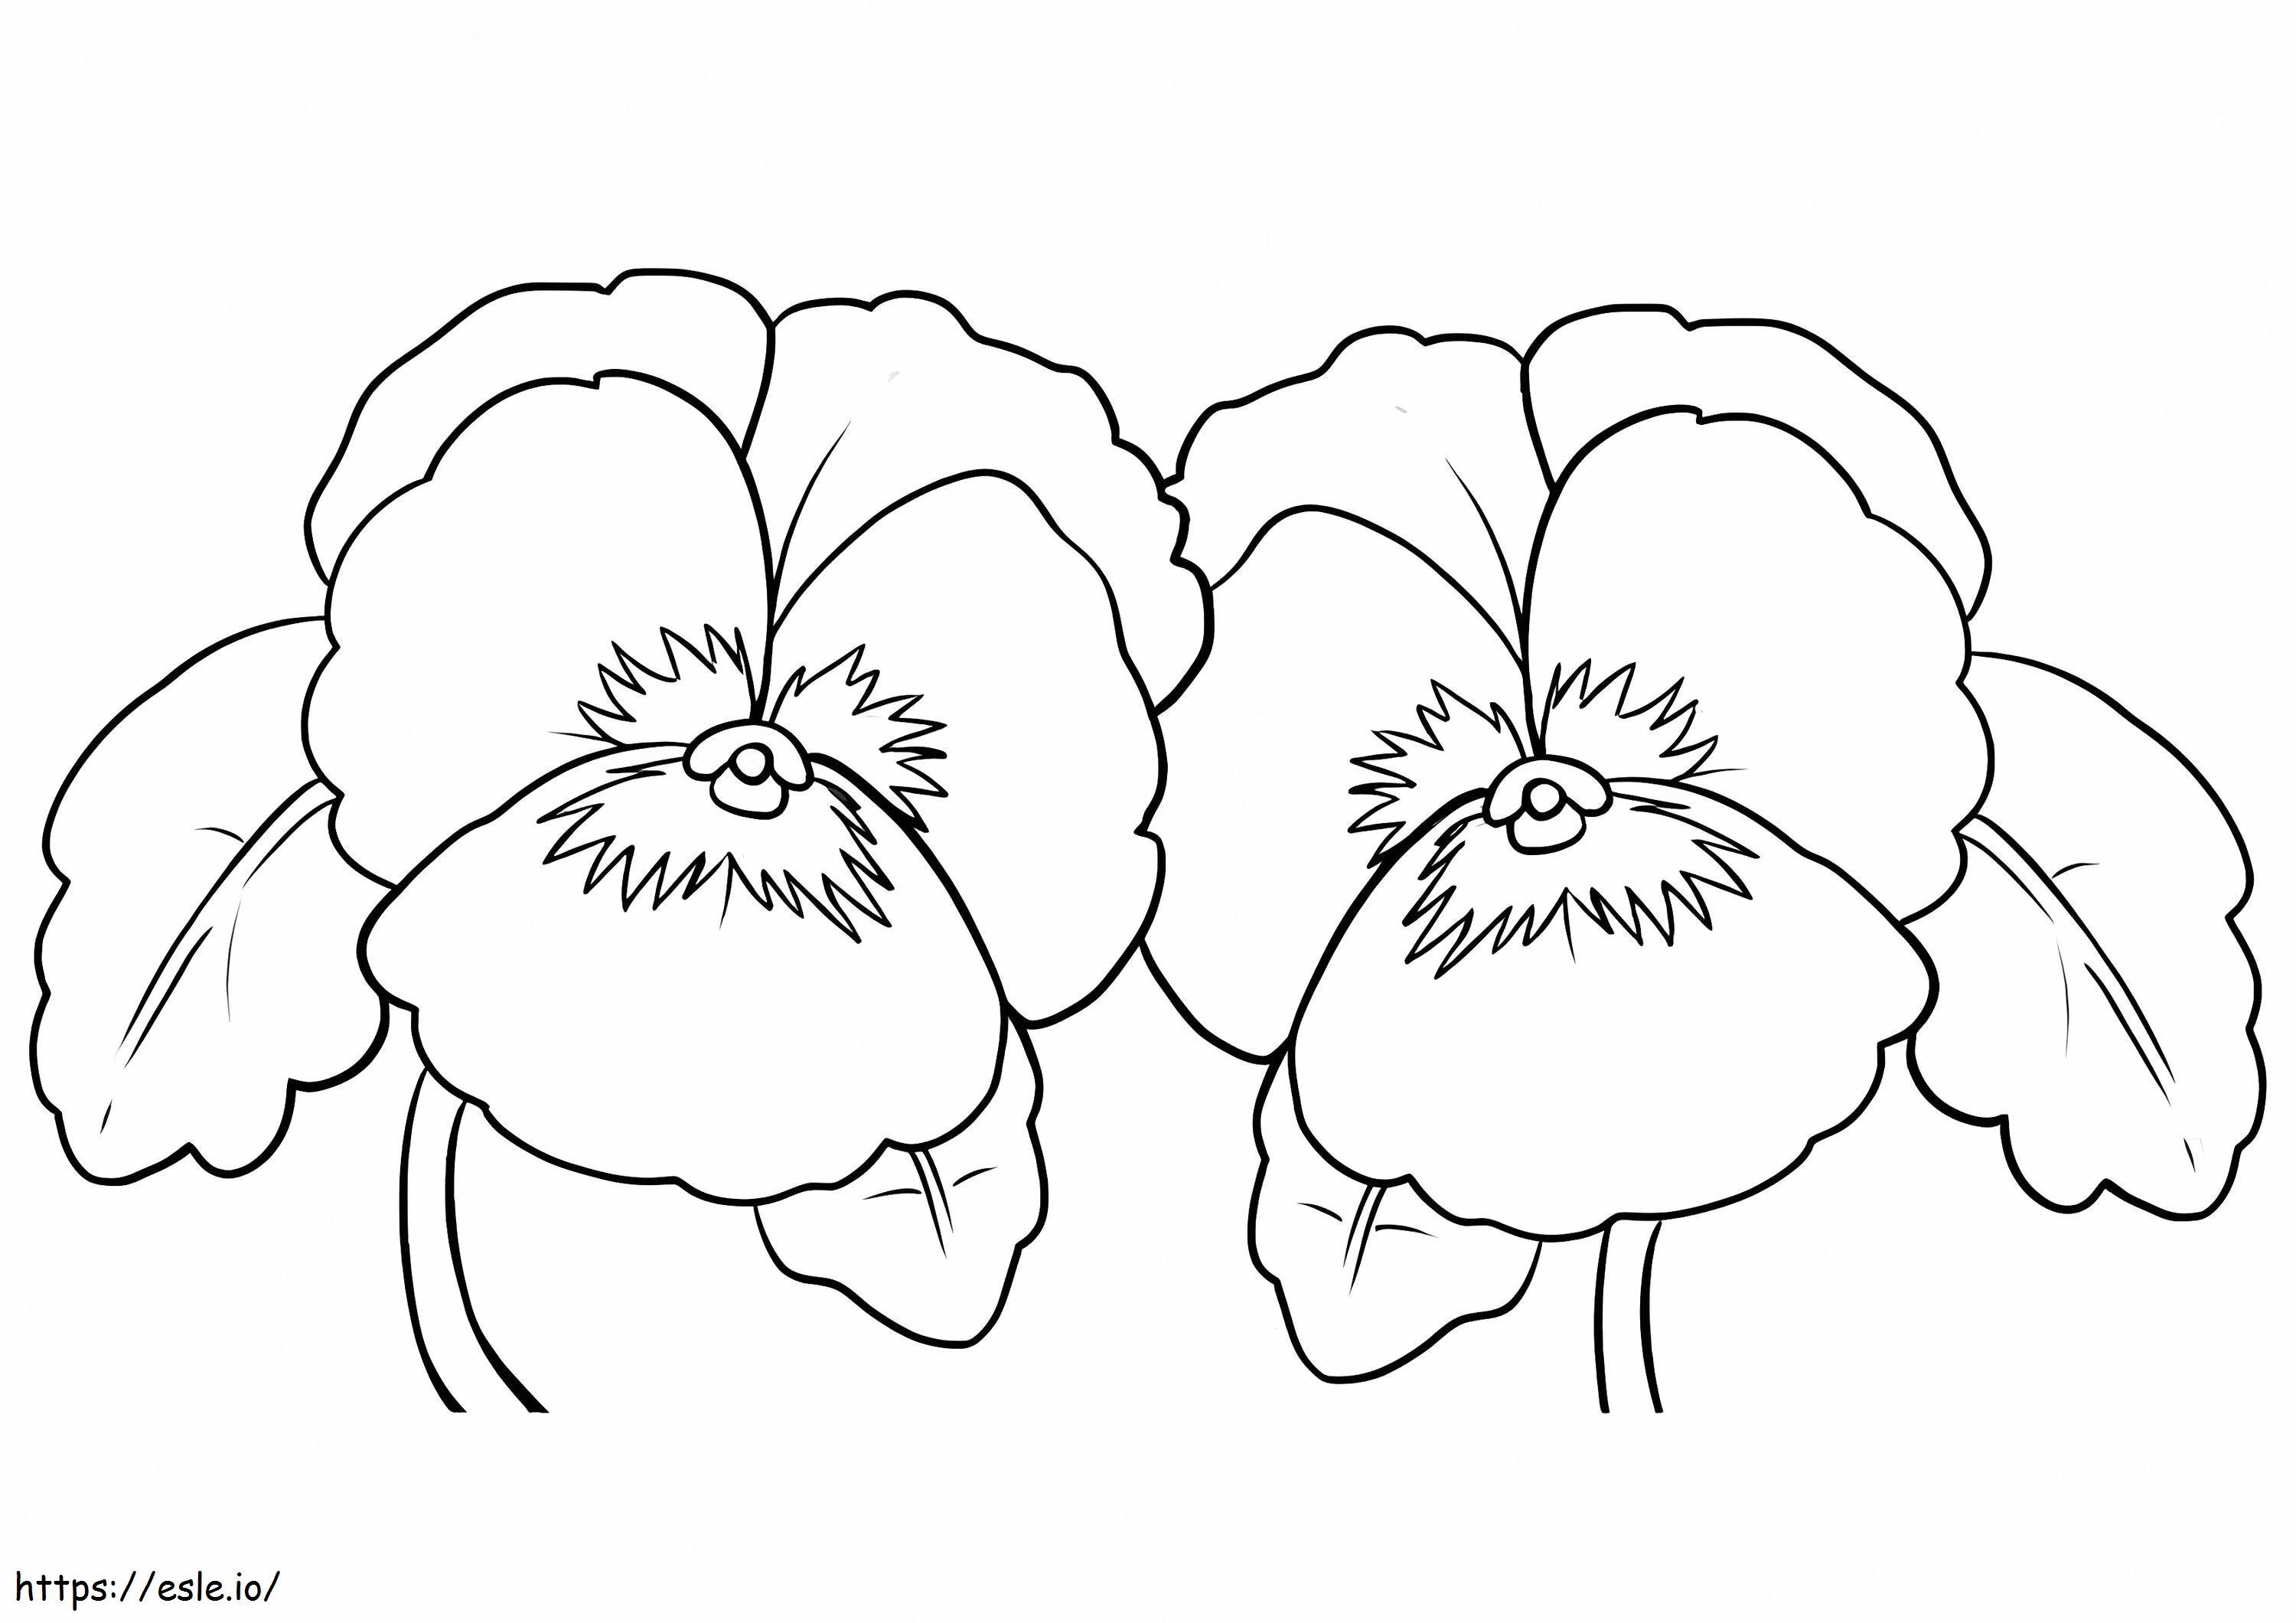 Two Pansies coloring page